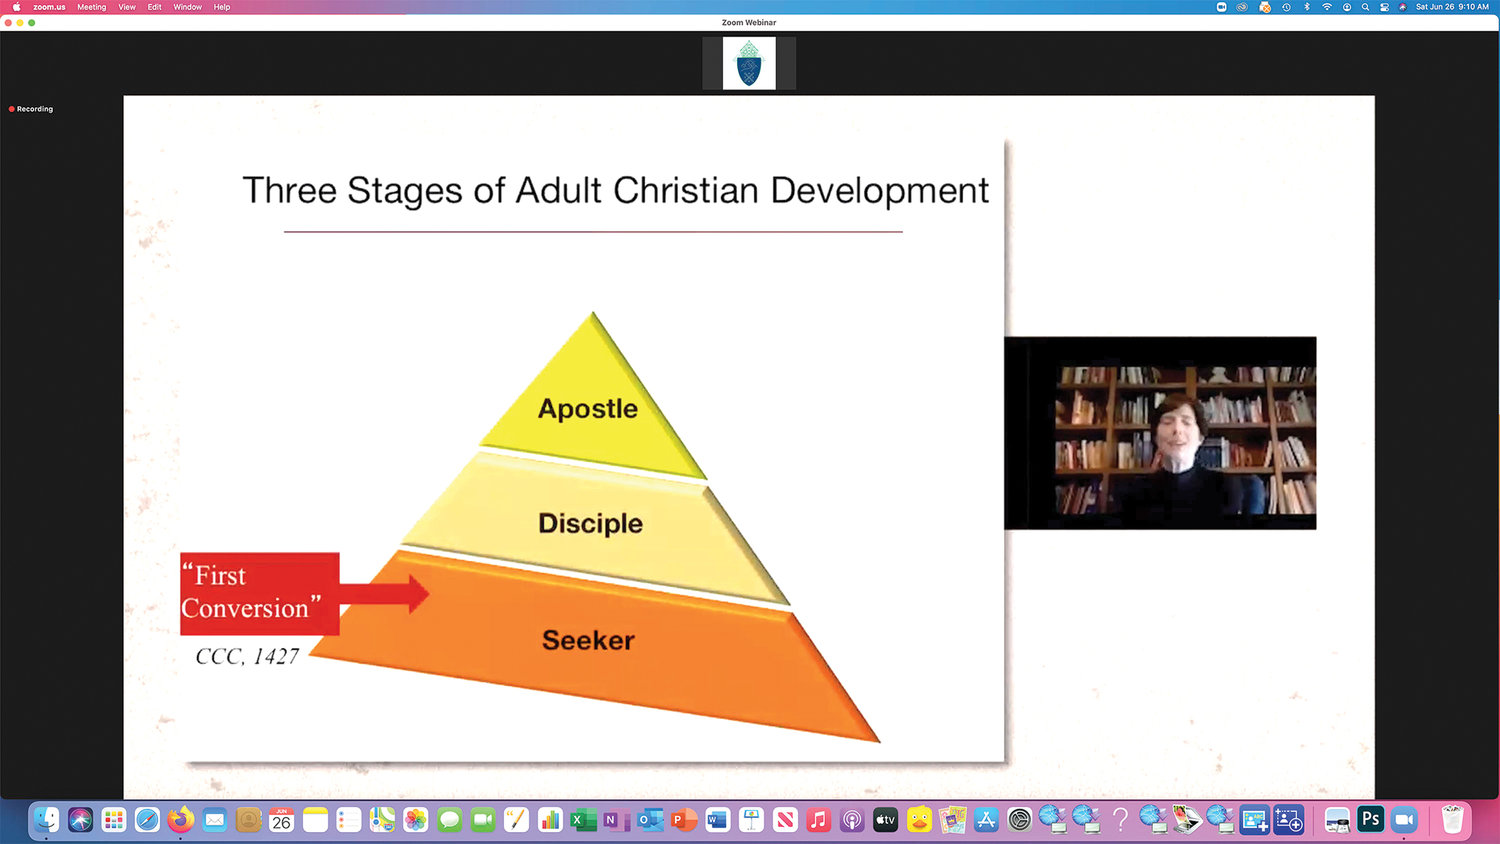 Sherry Anne Weddell, co-founder and executive director of the Catherine of Siena Institute, discusses the three stages of adult Christian development: seeker, disciple and apostle June 26 at New York Catholic Bible Summit 2021.